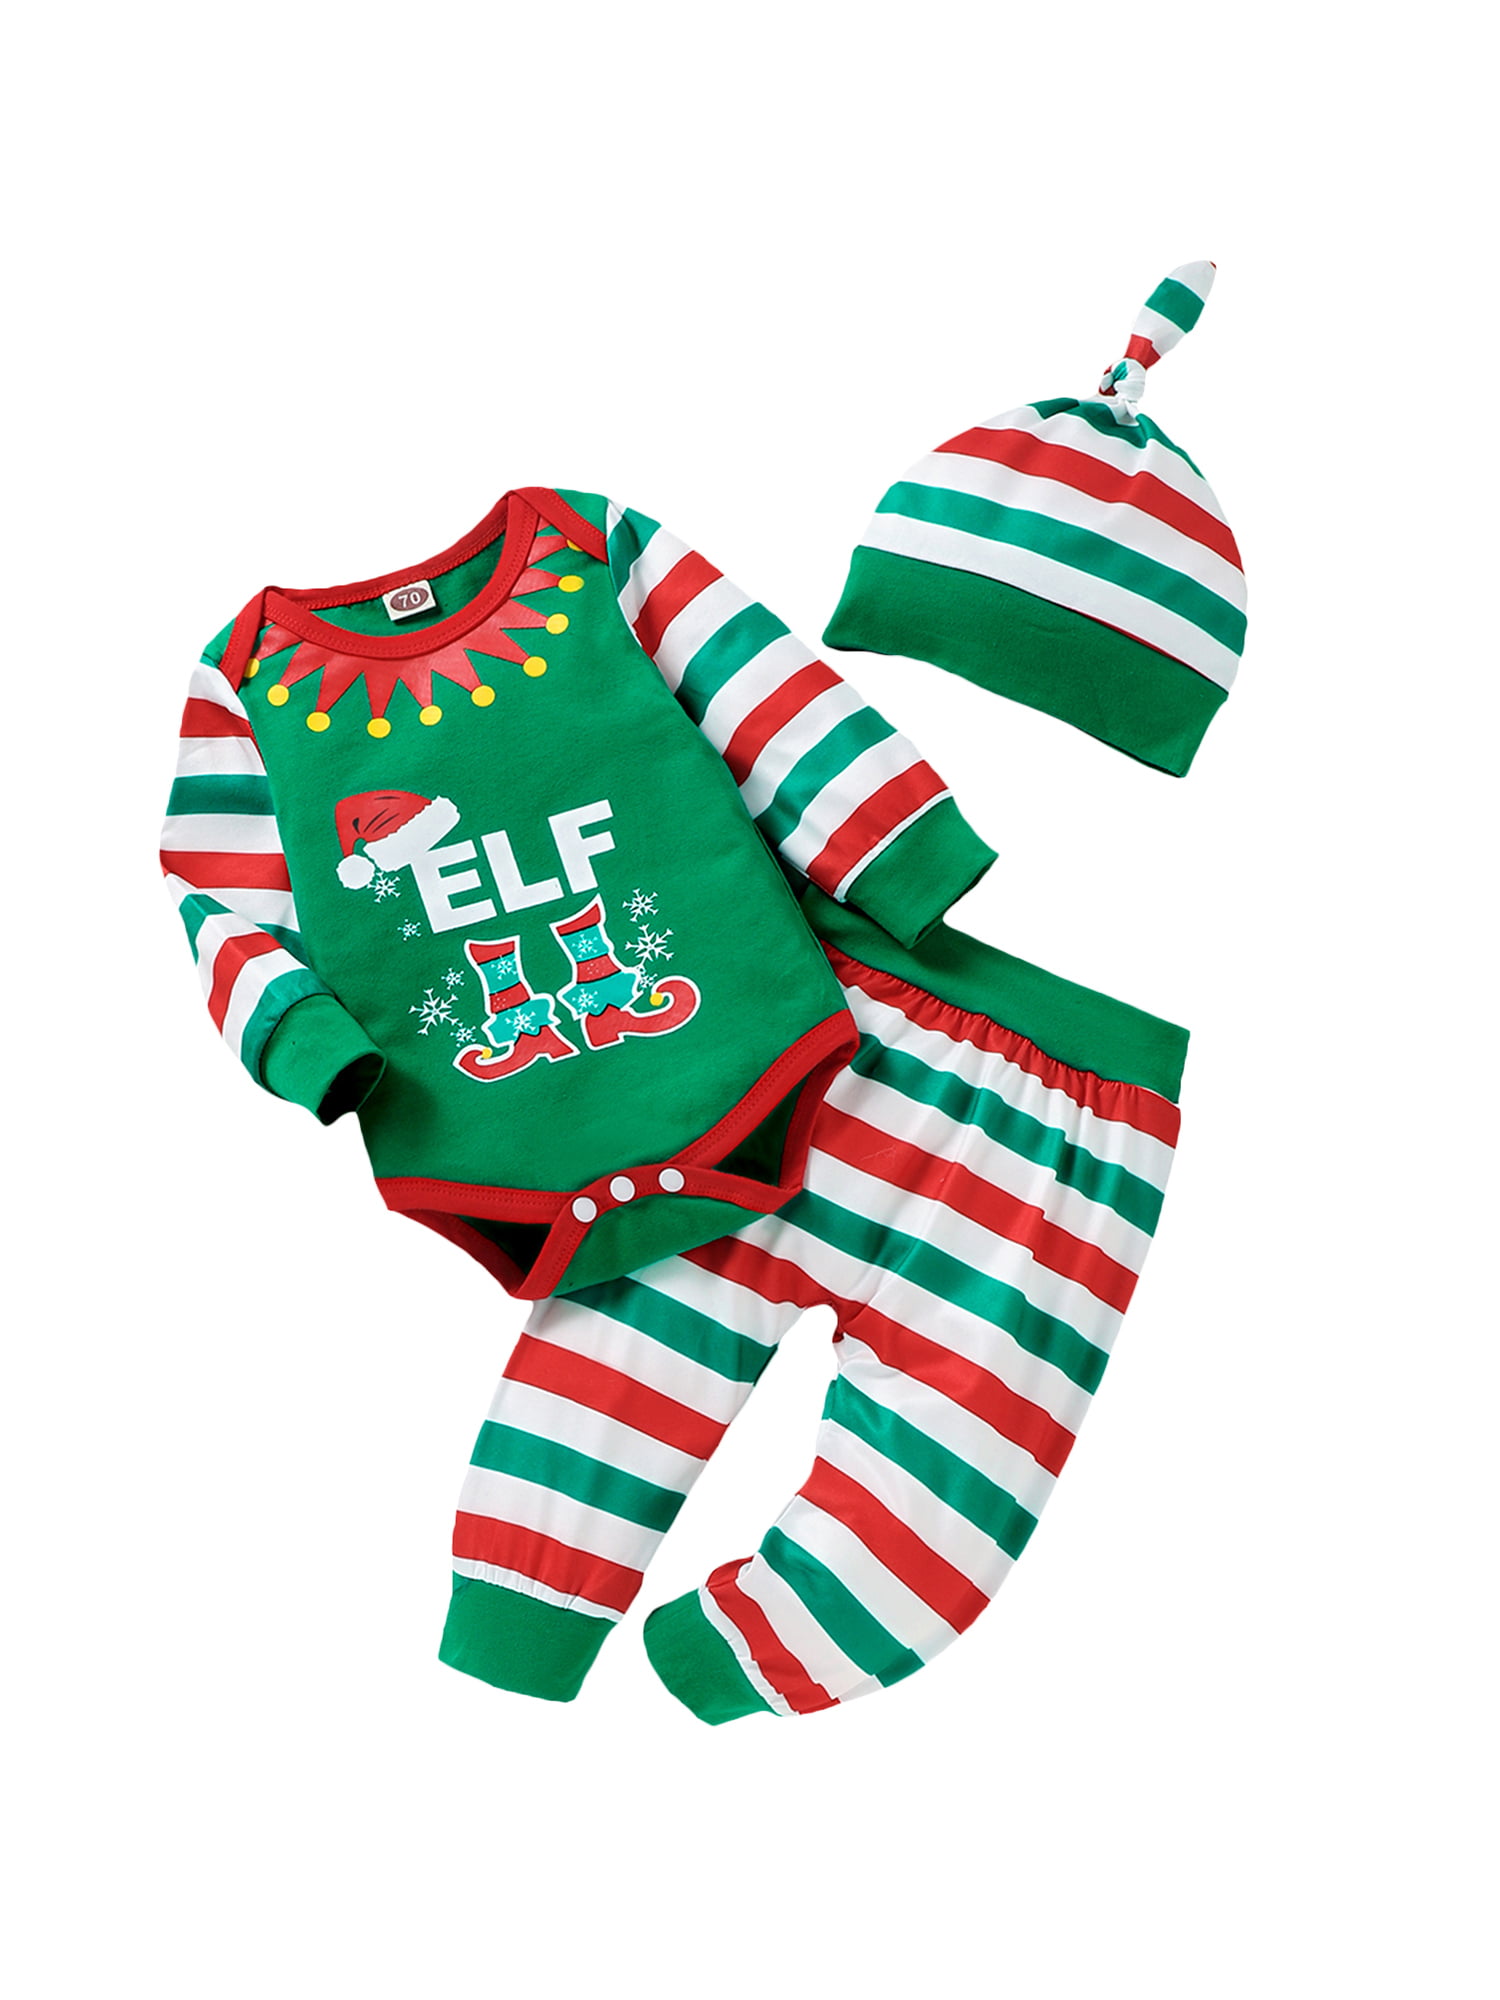 Newborn Infant Baby Boy Girl Romper Tops+Striped Pants+Hat Christmas Outfits Set 